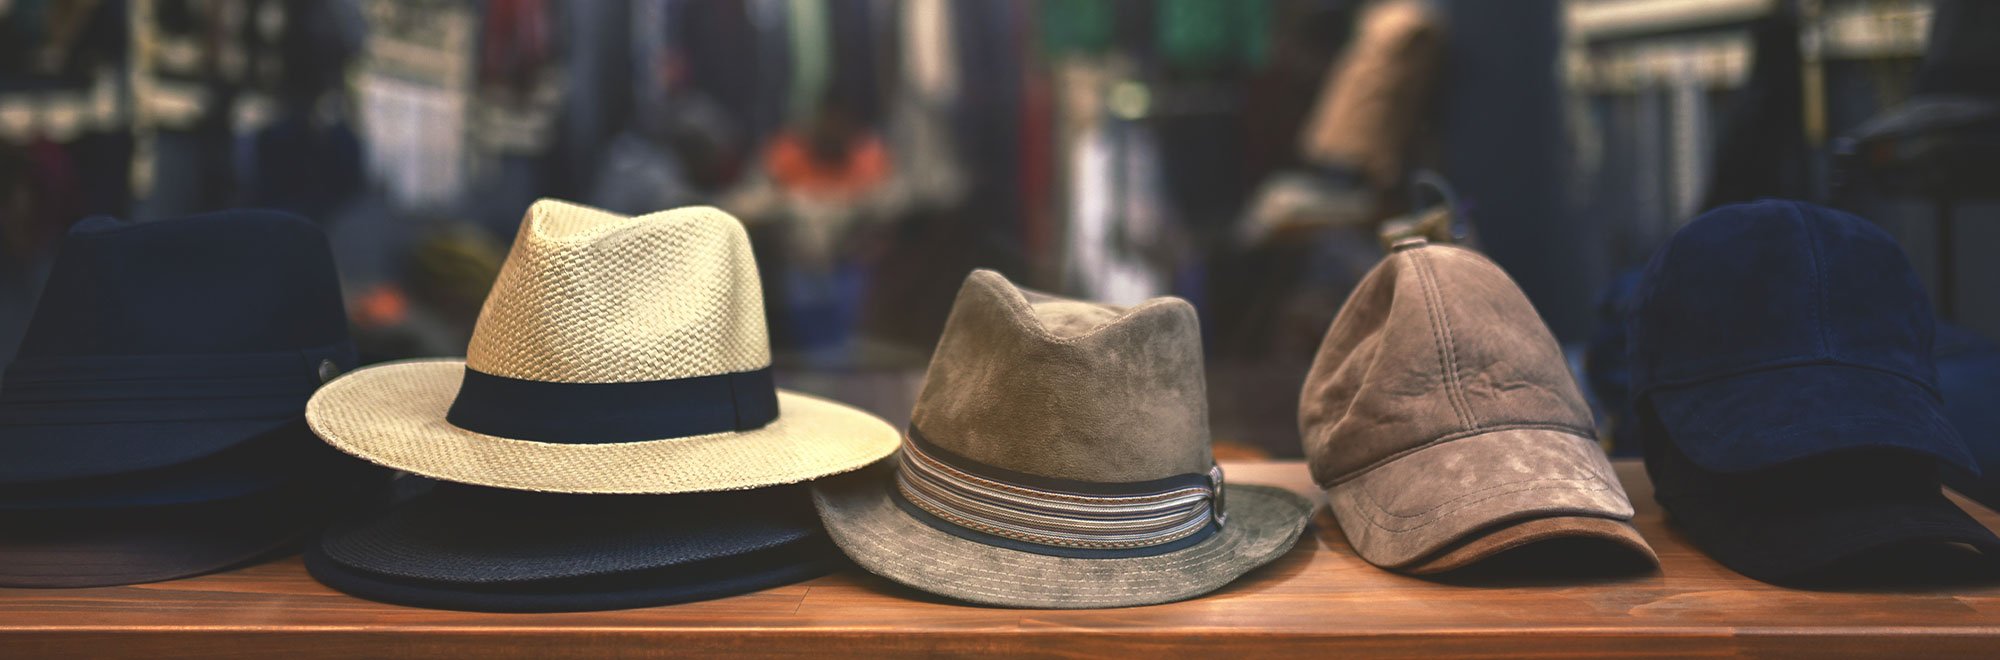 Seven Hats Alliance Managers Wear Each Day